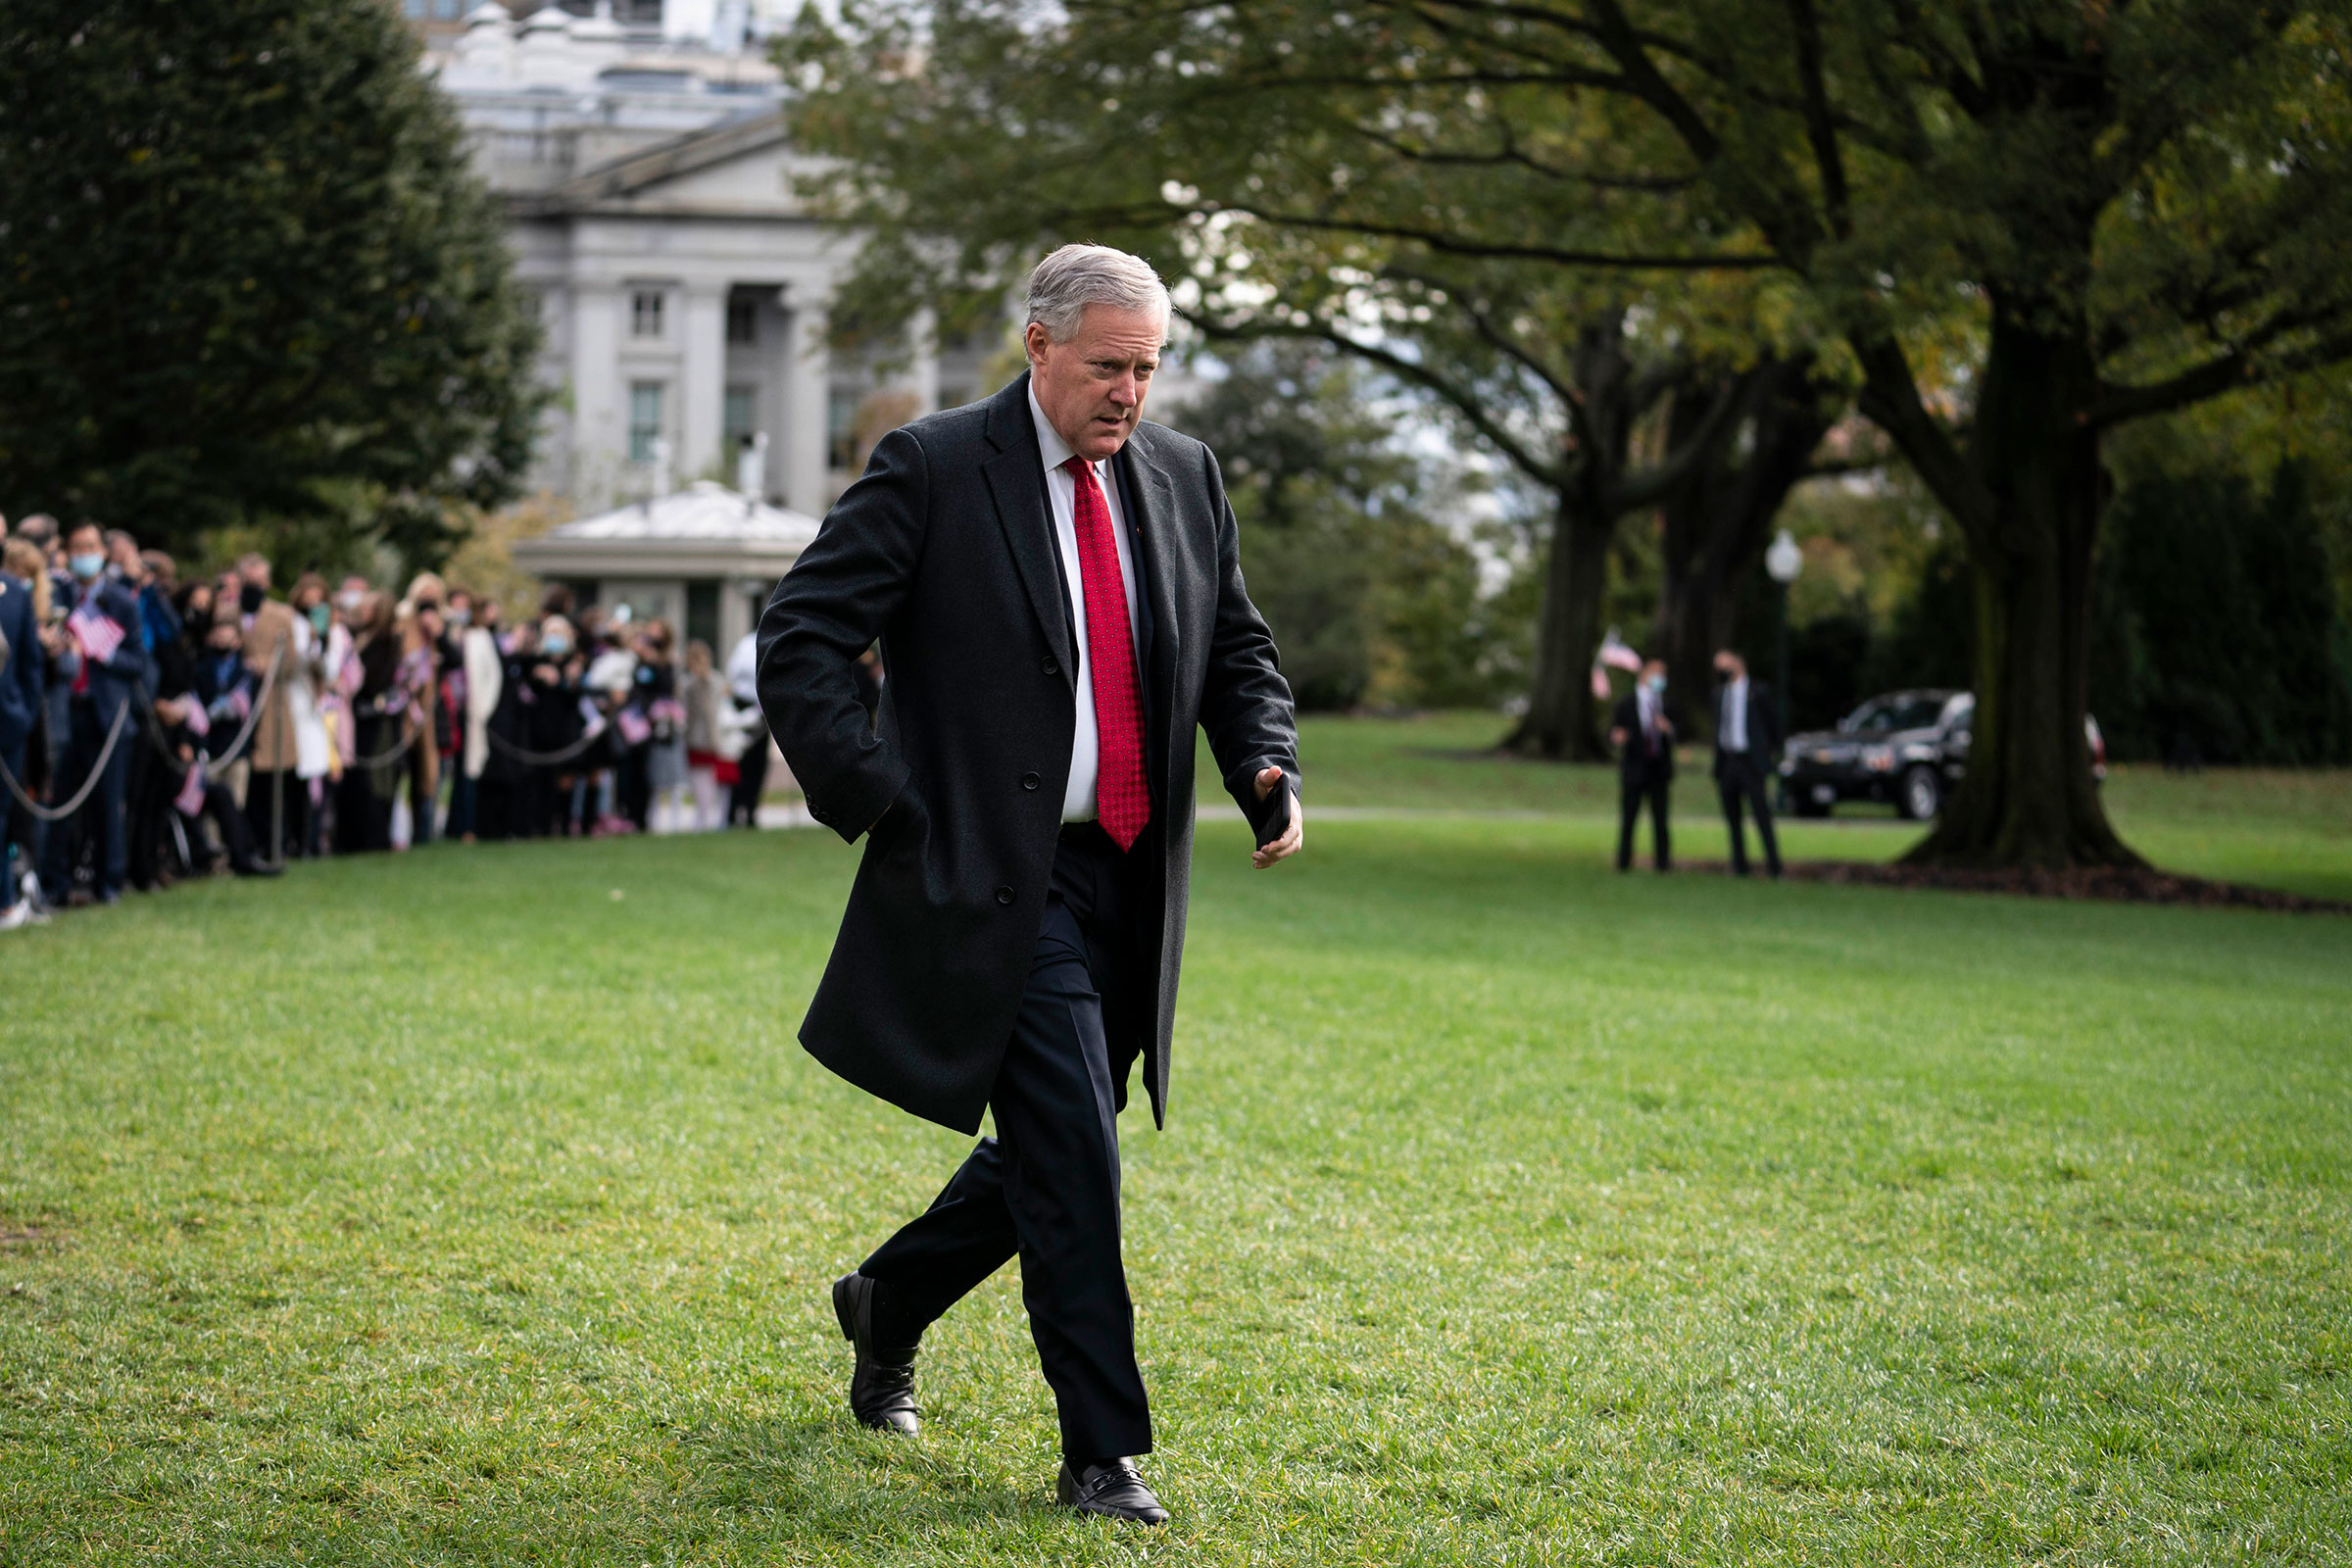 White House Chief of Staff Mark Meadows walks along the South Lawn before President Donald Trump departs from the White House on October 30, 2020 in Washington, DC.